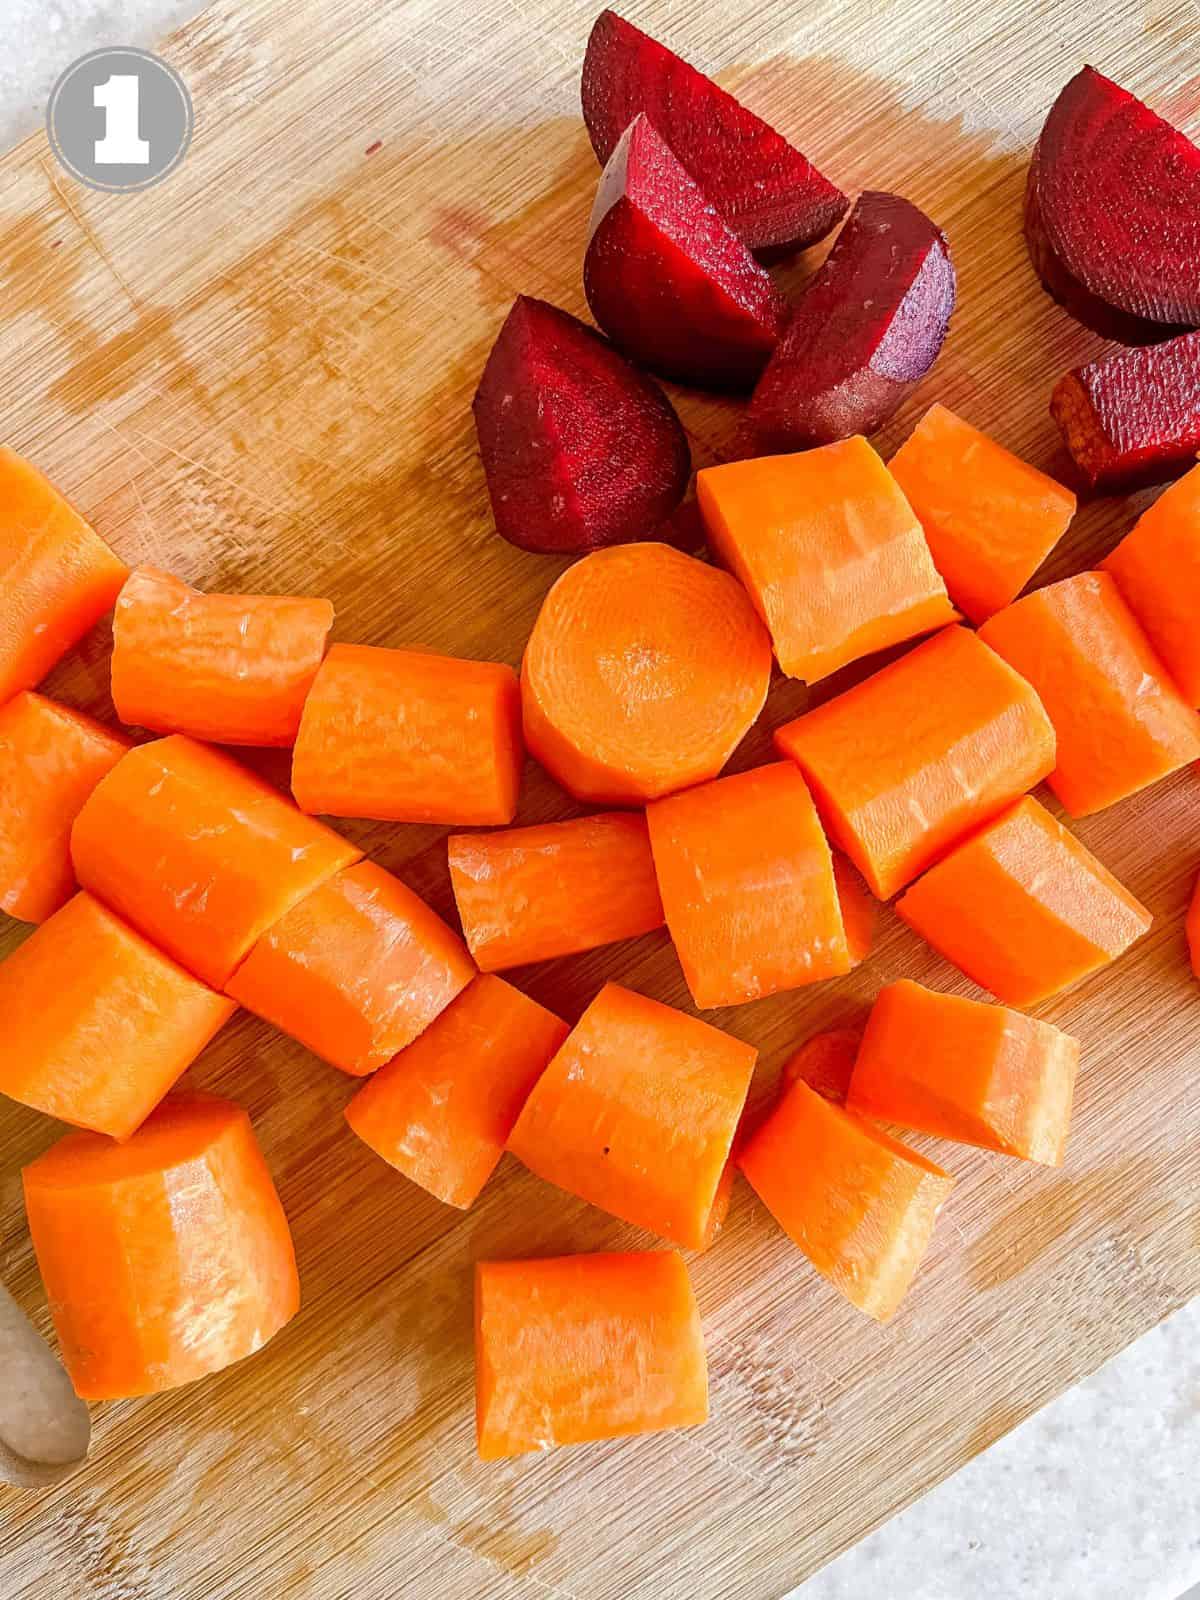 diced carrots and beets on a wooden chopping board labelled number one.